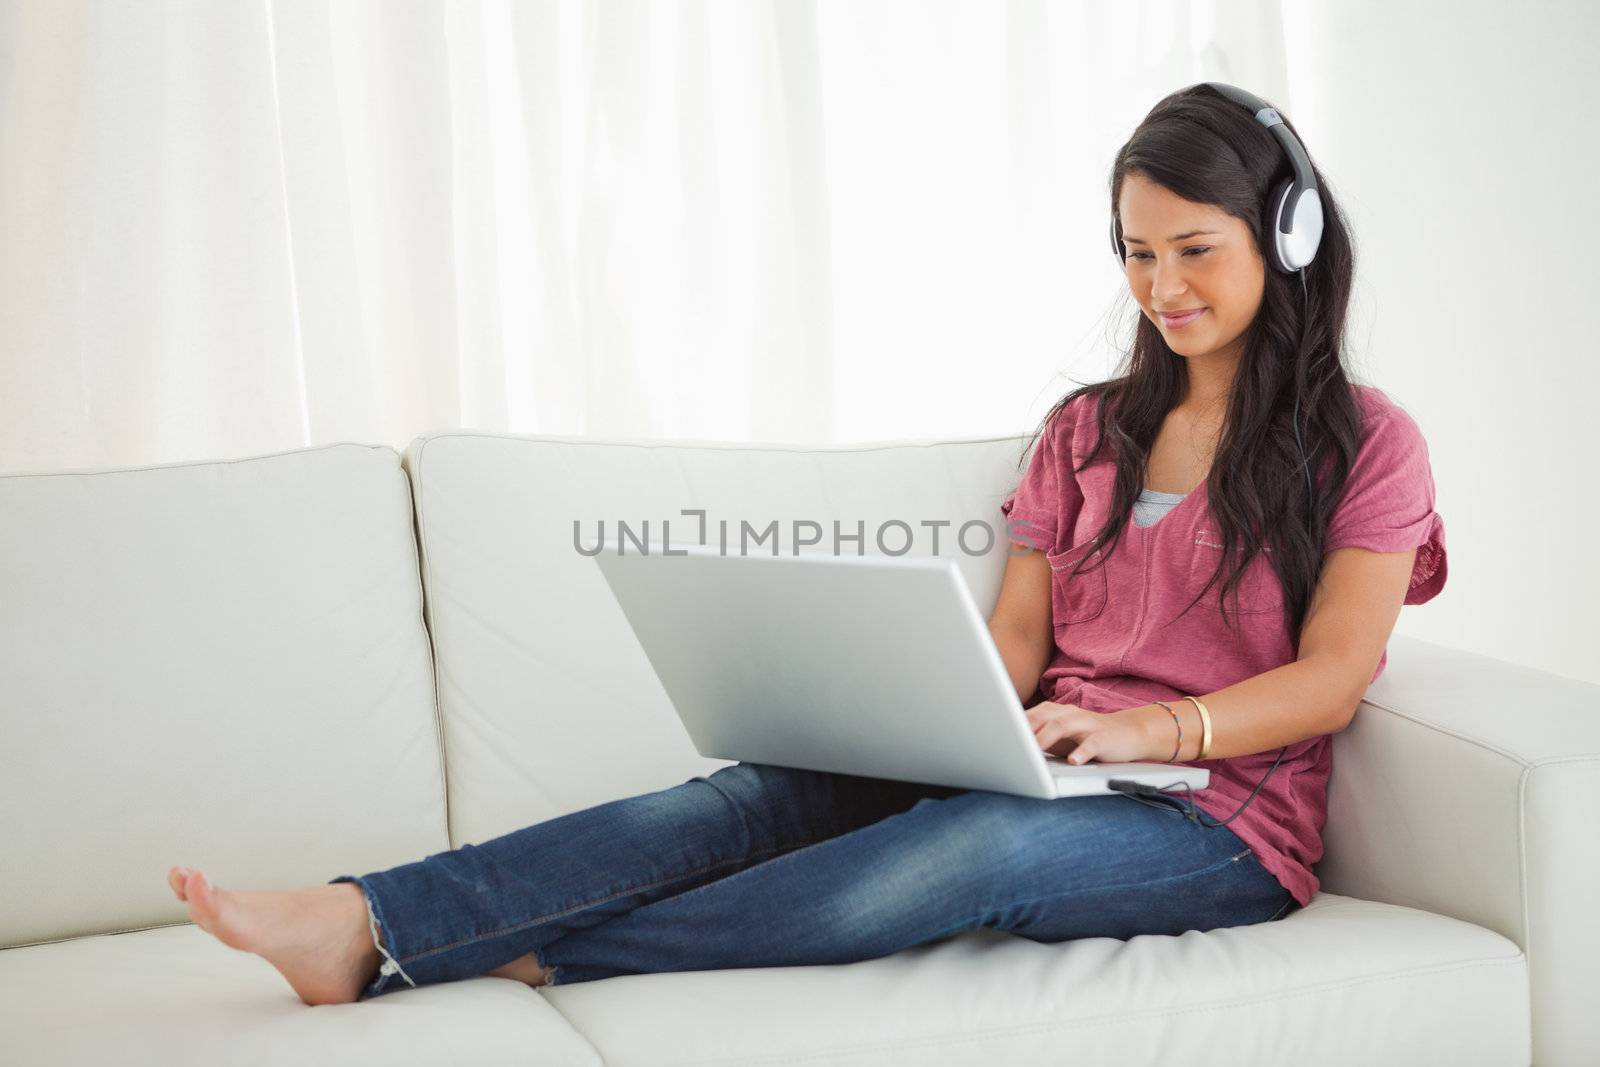 Latino student wears earphone using a laptop while sitting on a sofa